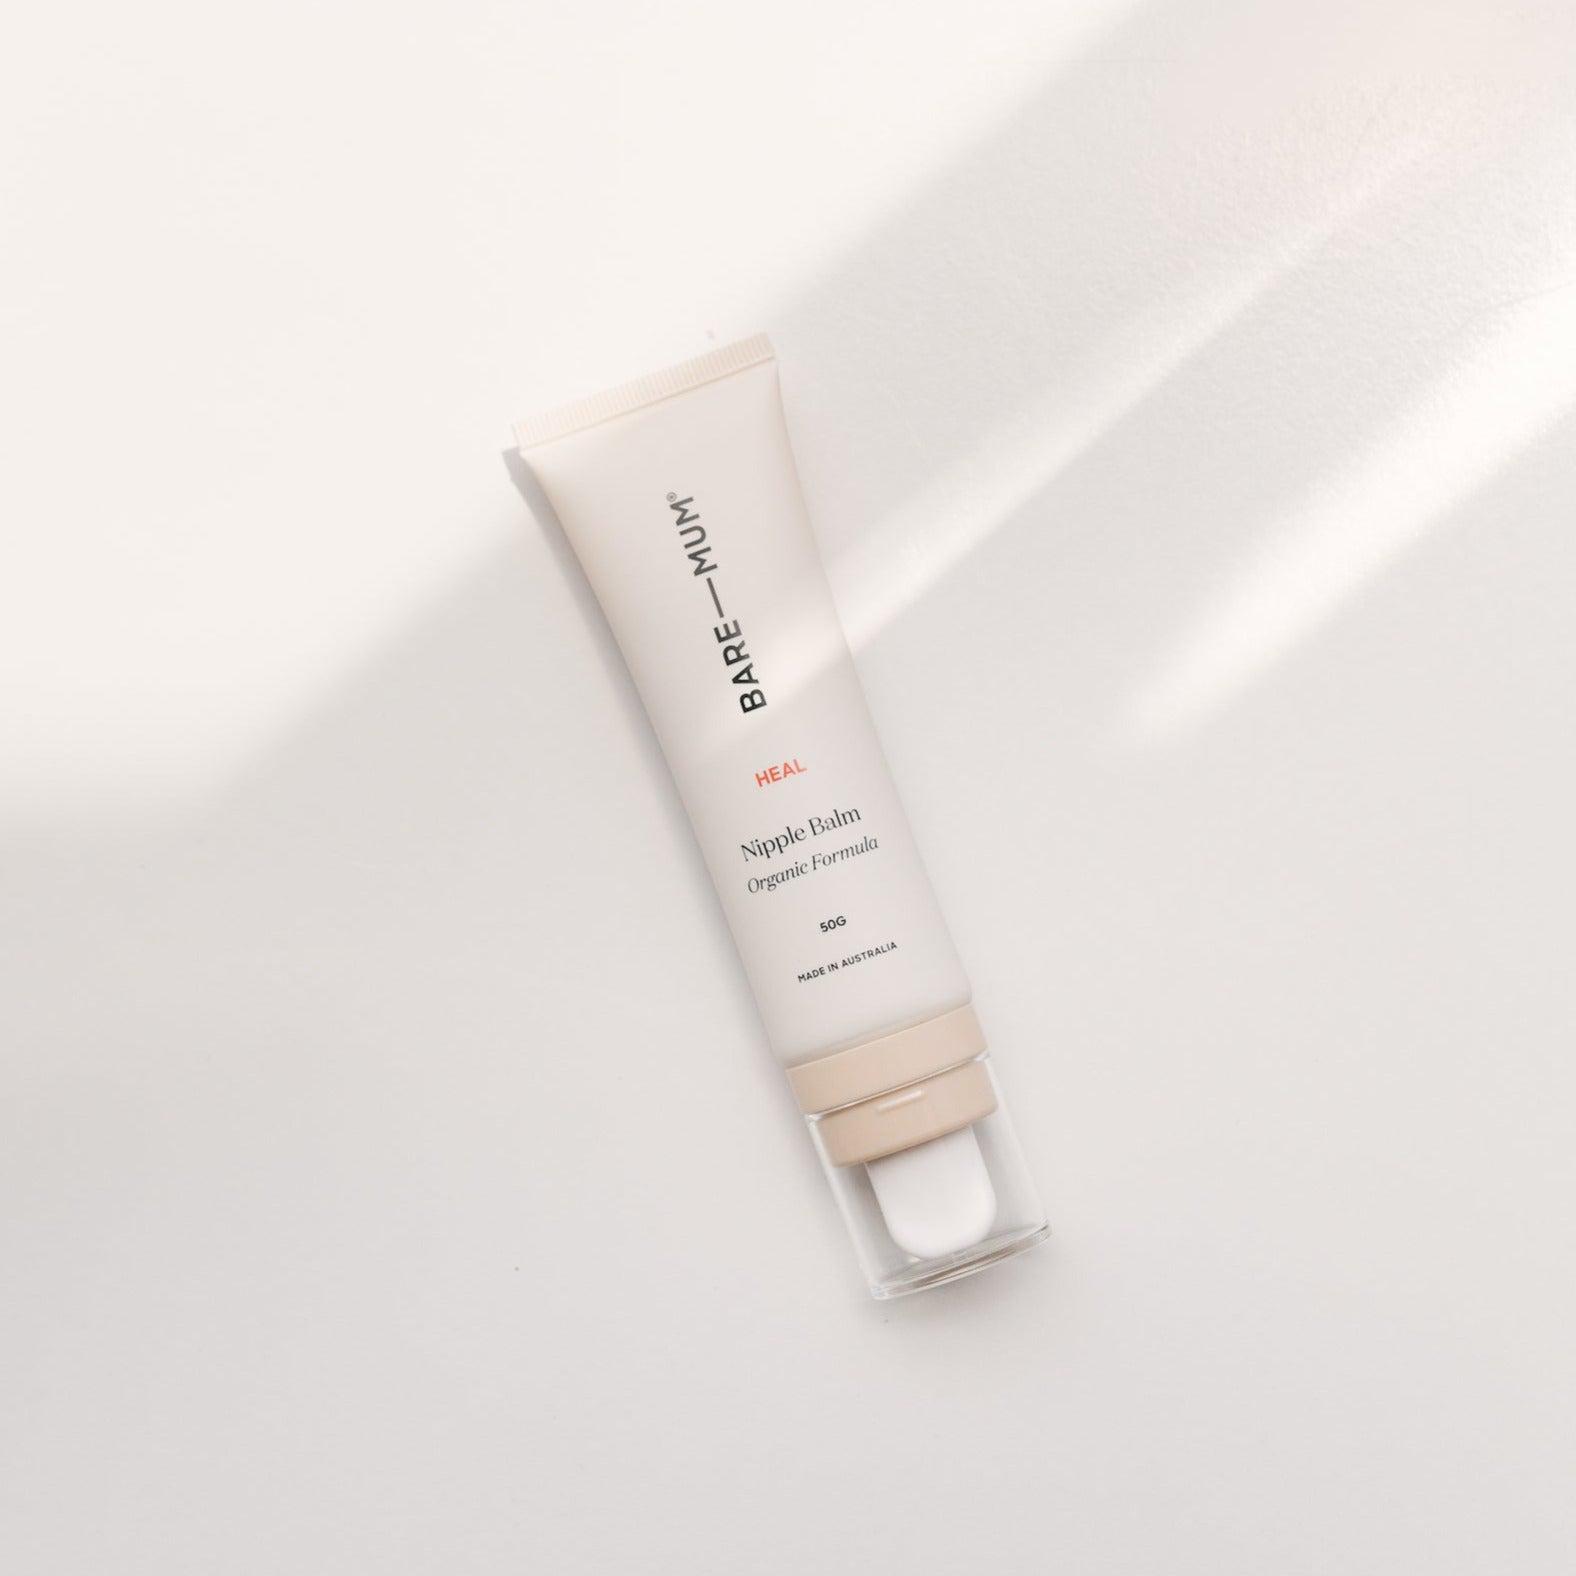 A tube of Bare Mum Nipple Balm, recommended for postpartum recovery and breastfeeding, displayed on a white surface.